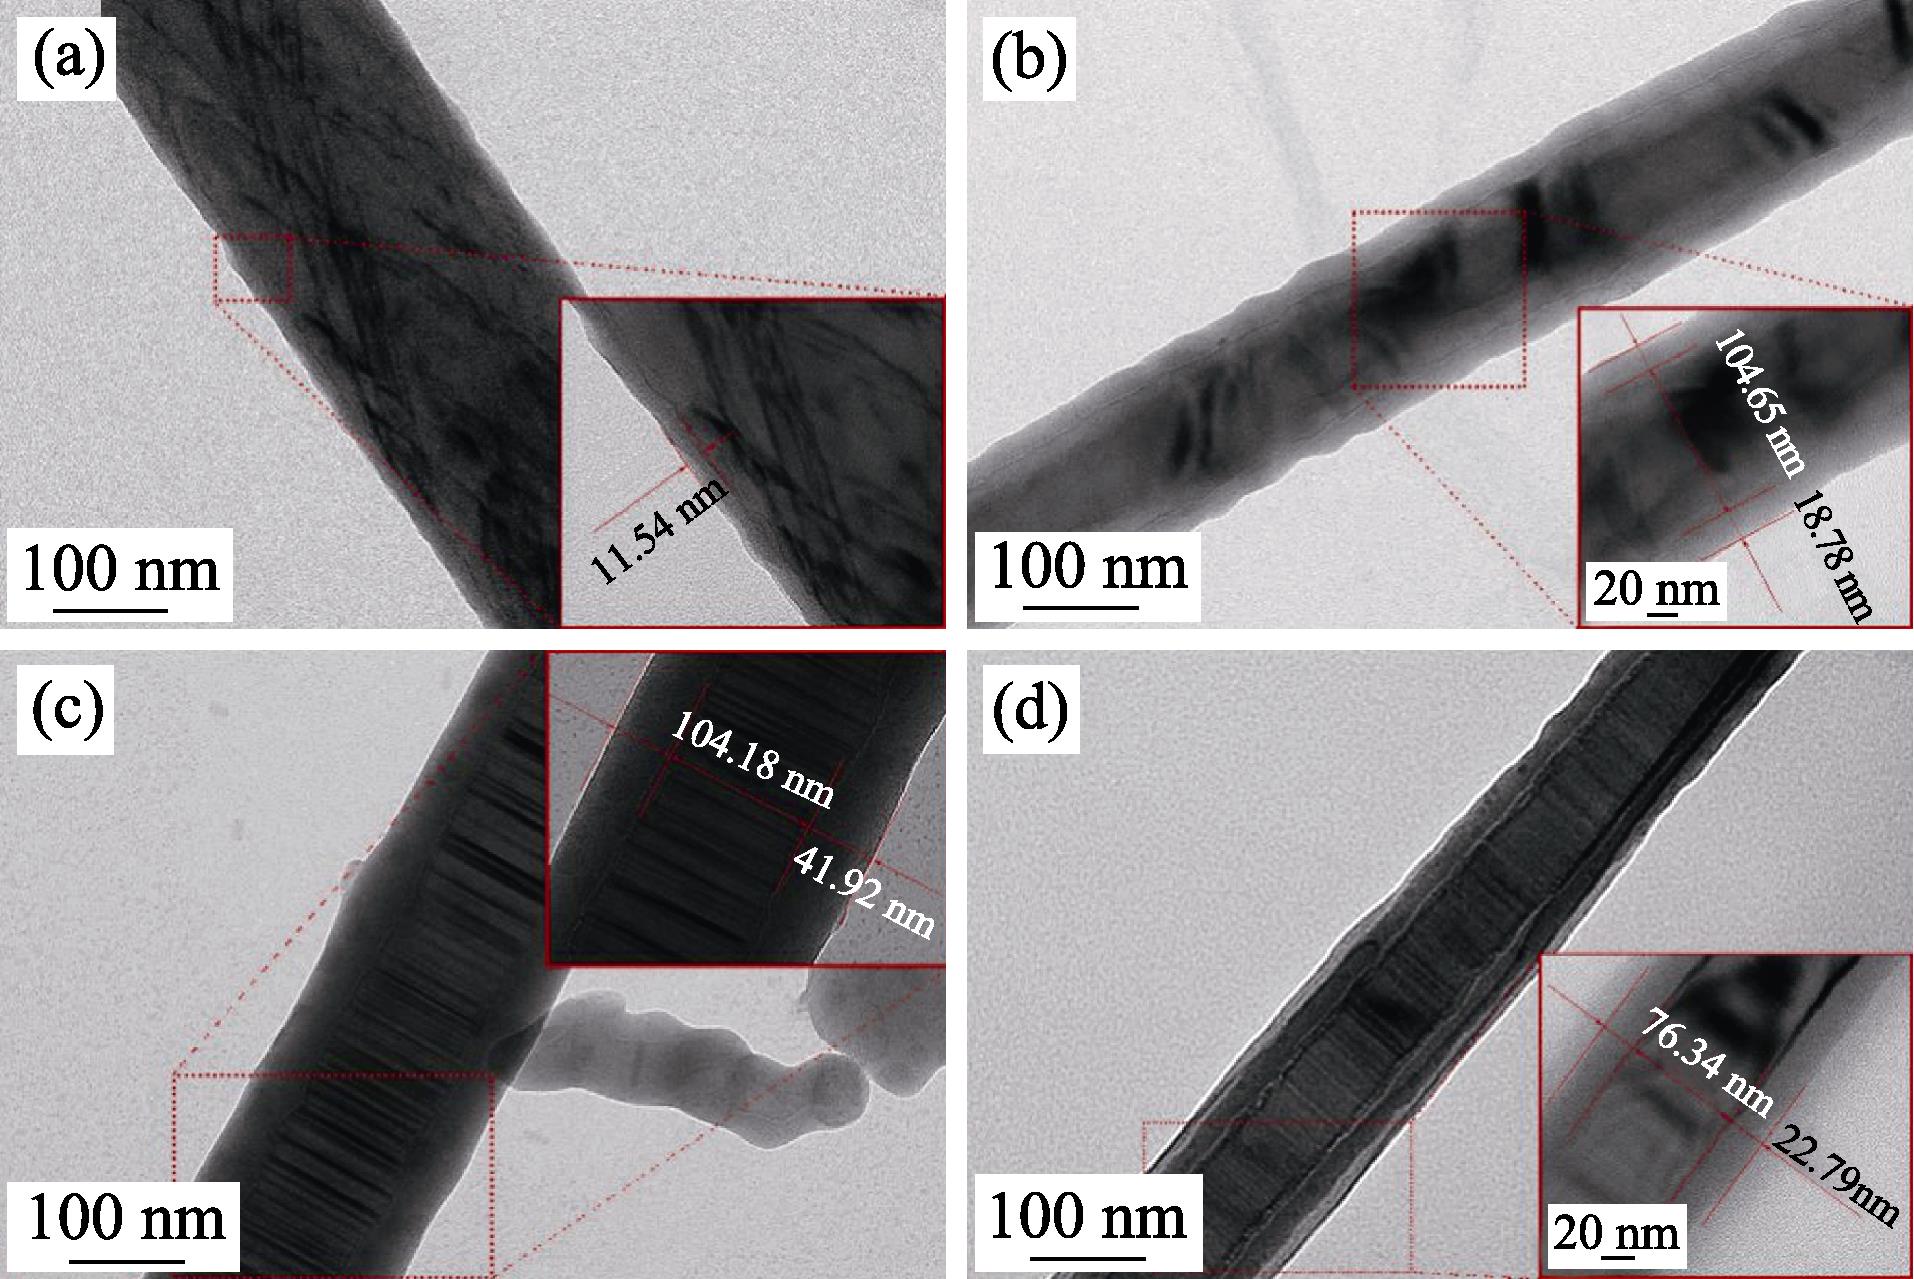 TEM images of SiC whiskers oxidized at 750 ℃ for (a) 30, (b) 60 and (c) 90 min, and (d) 800 ℃ for 60 min